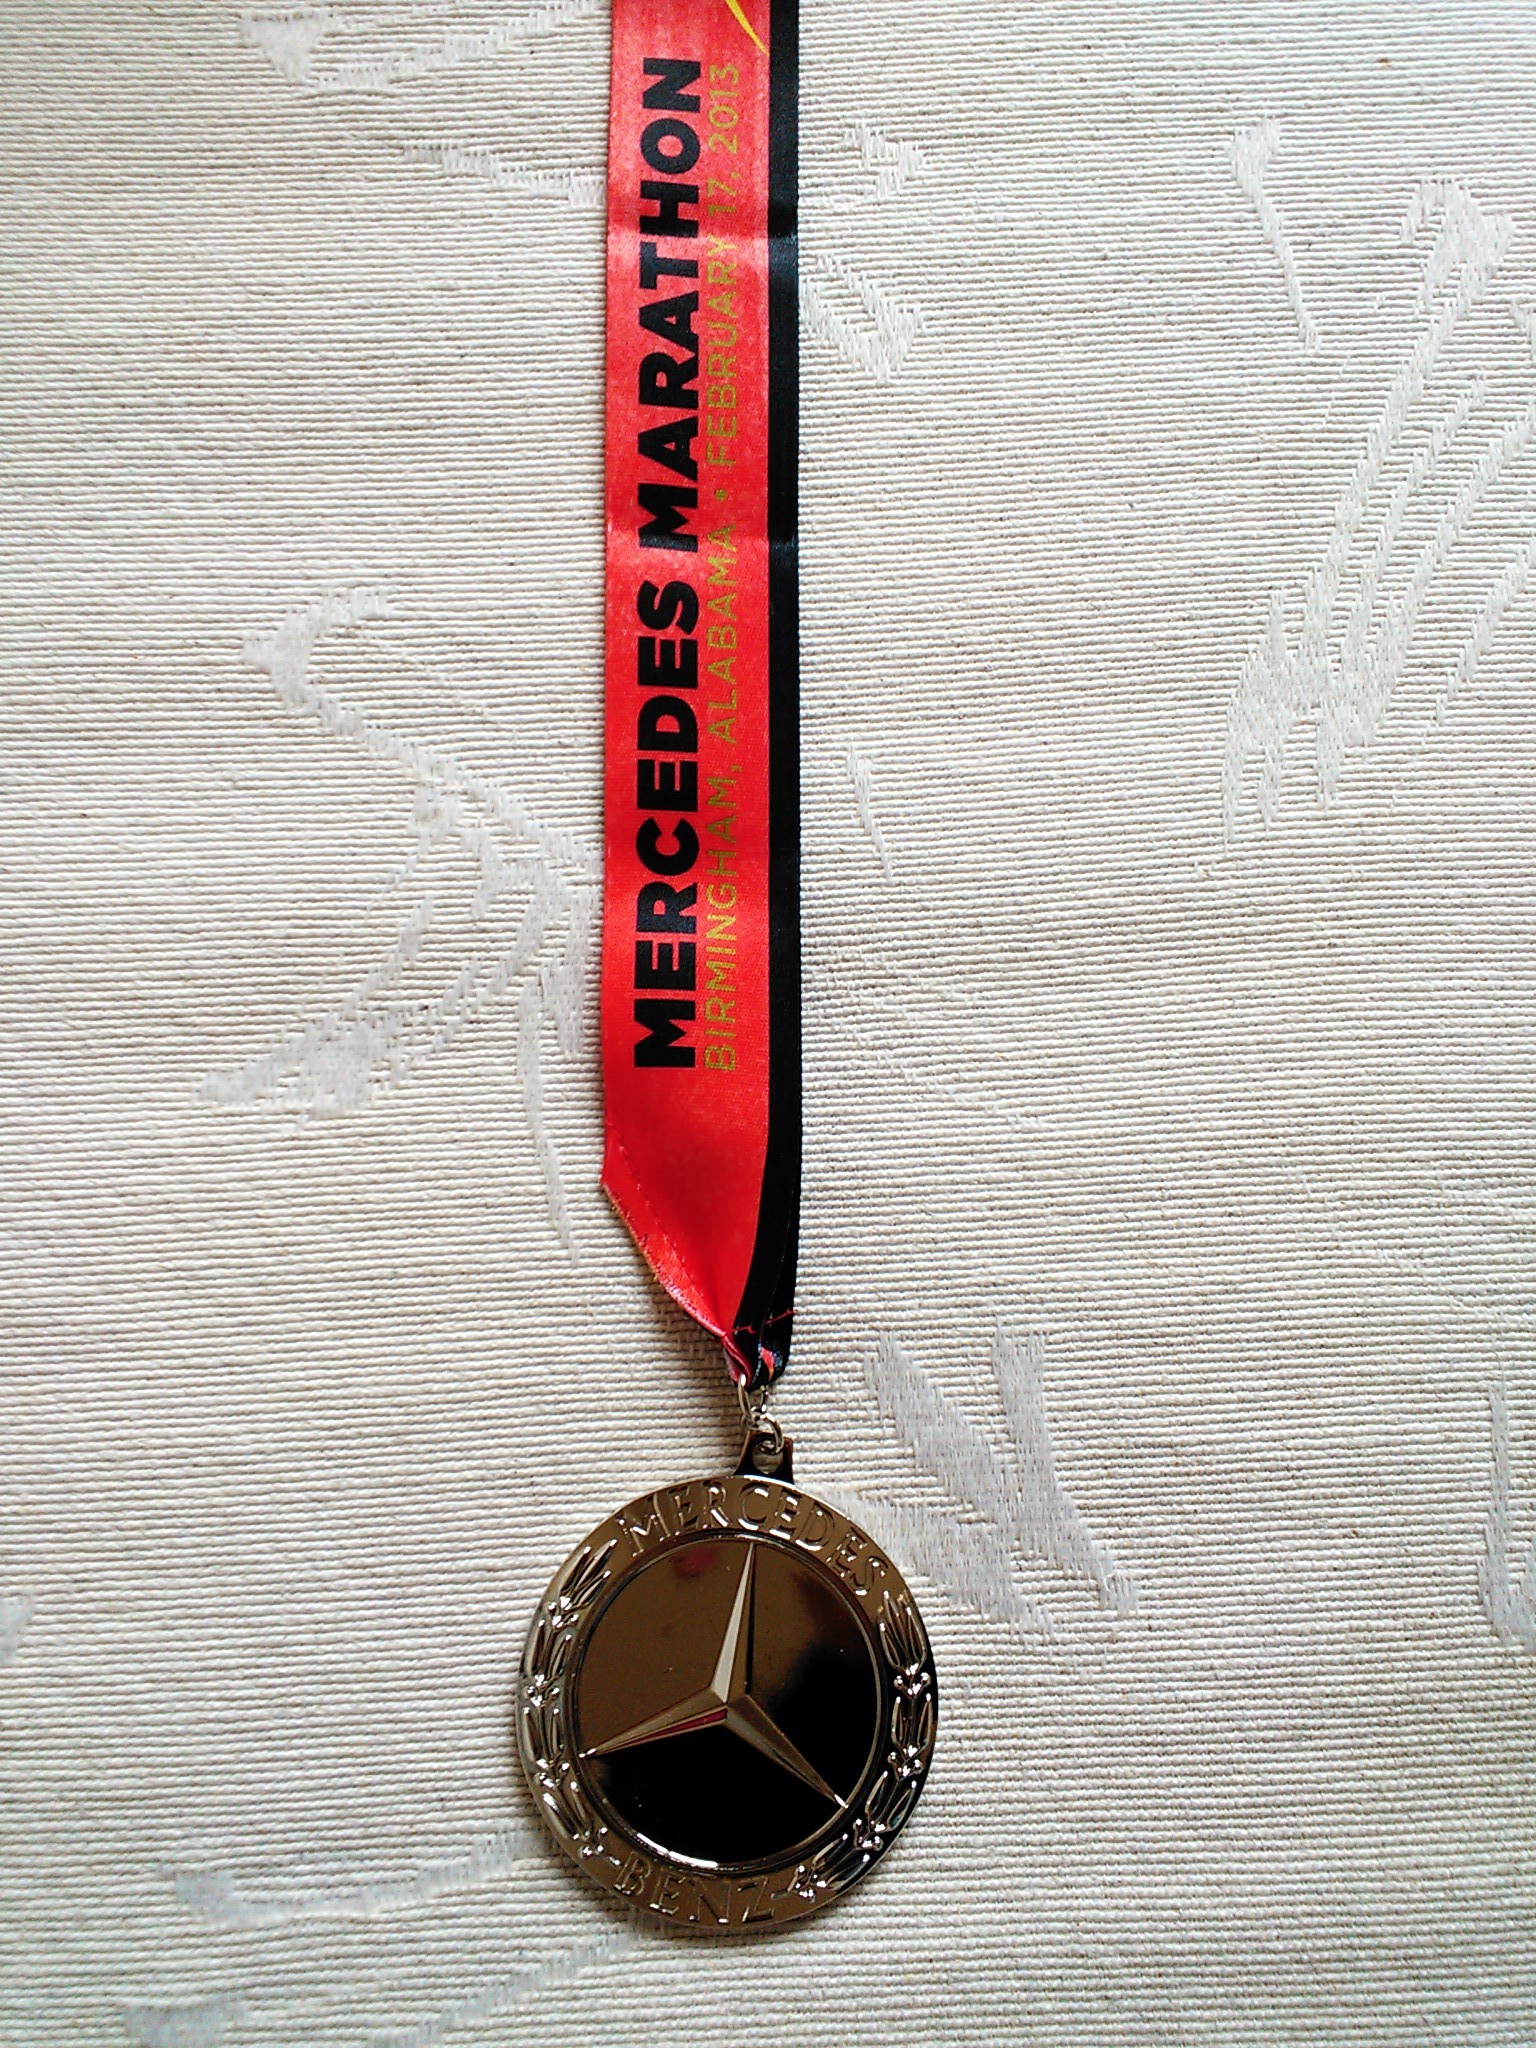 The medal for the Mercedes Marathon was Mercedes quality.